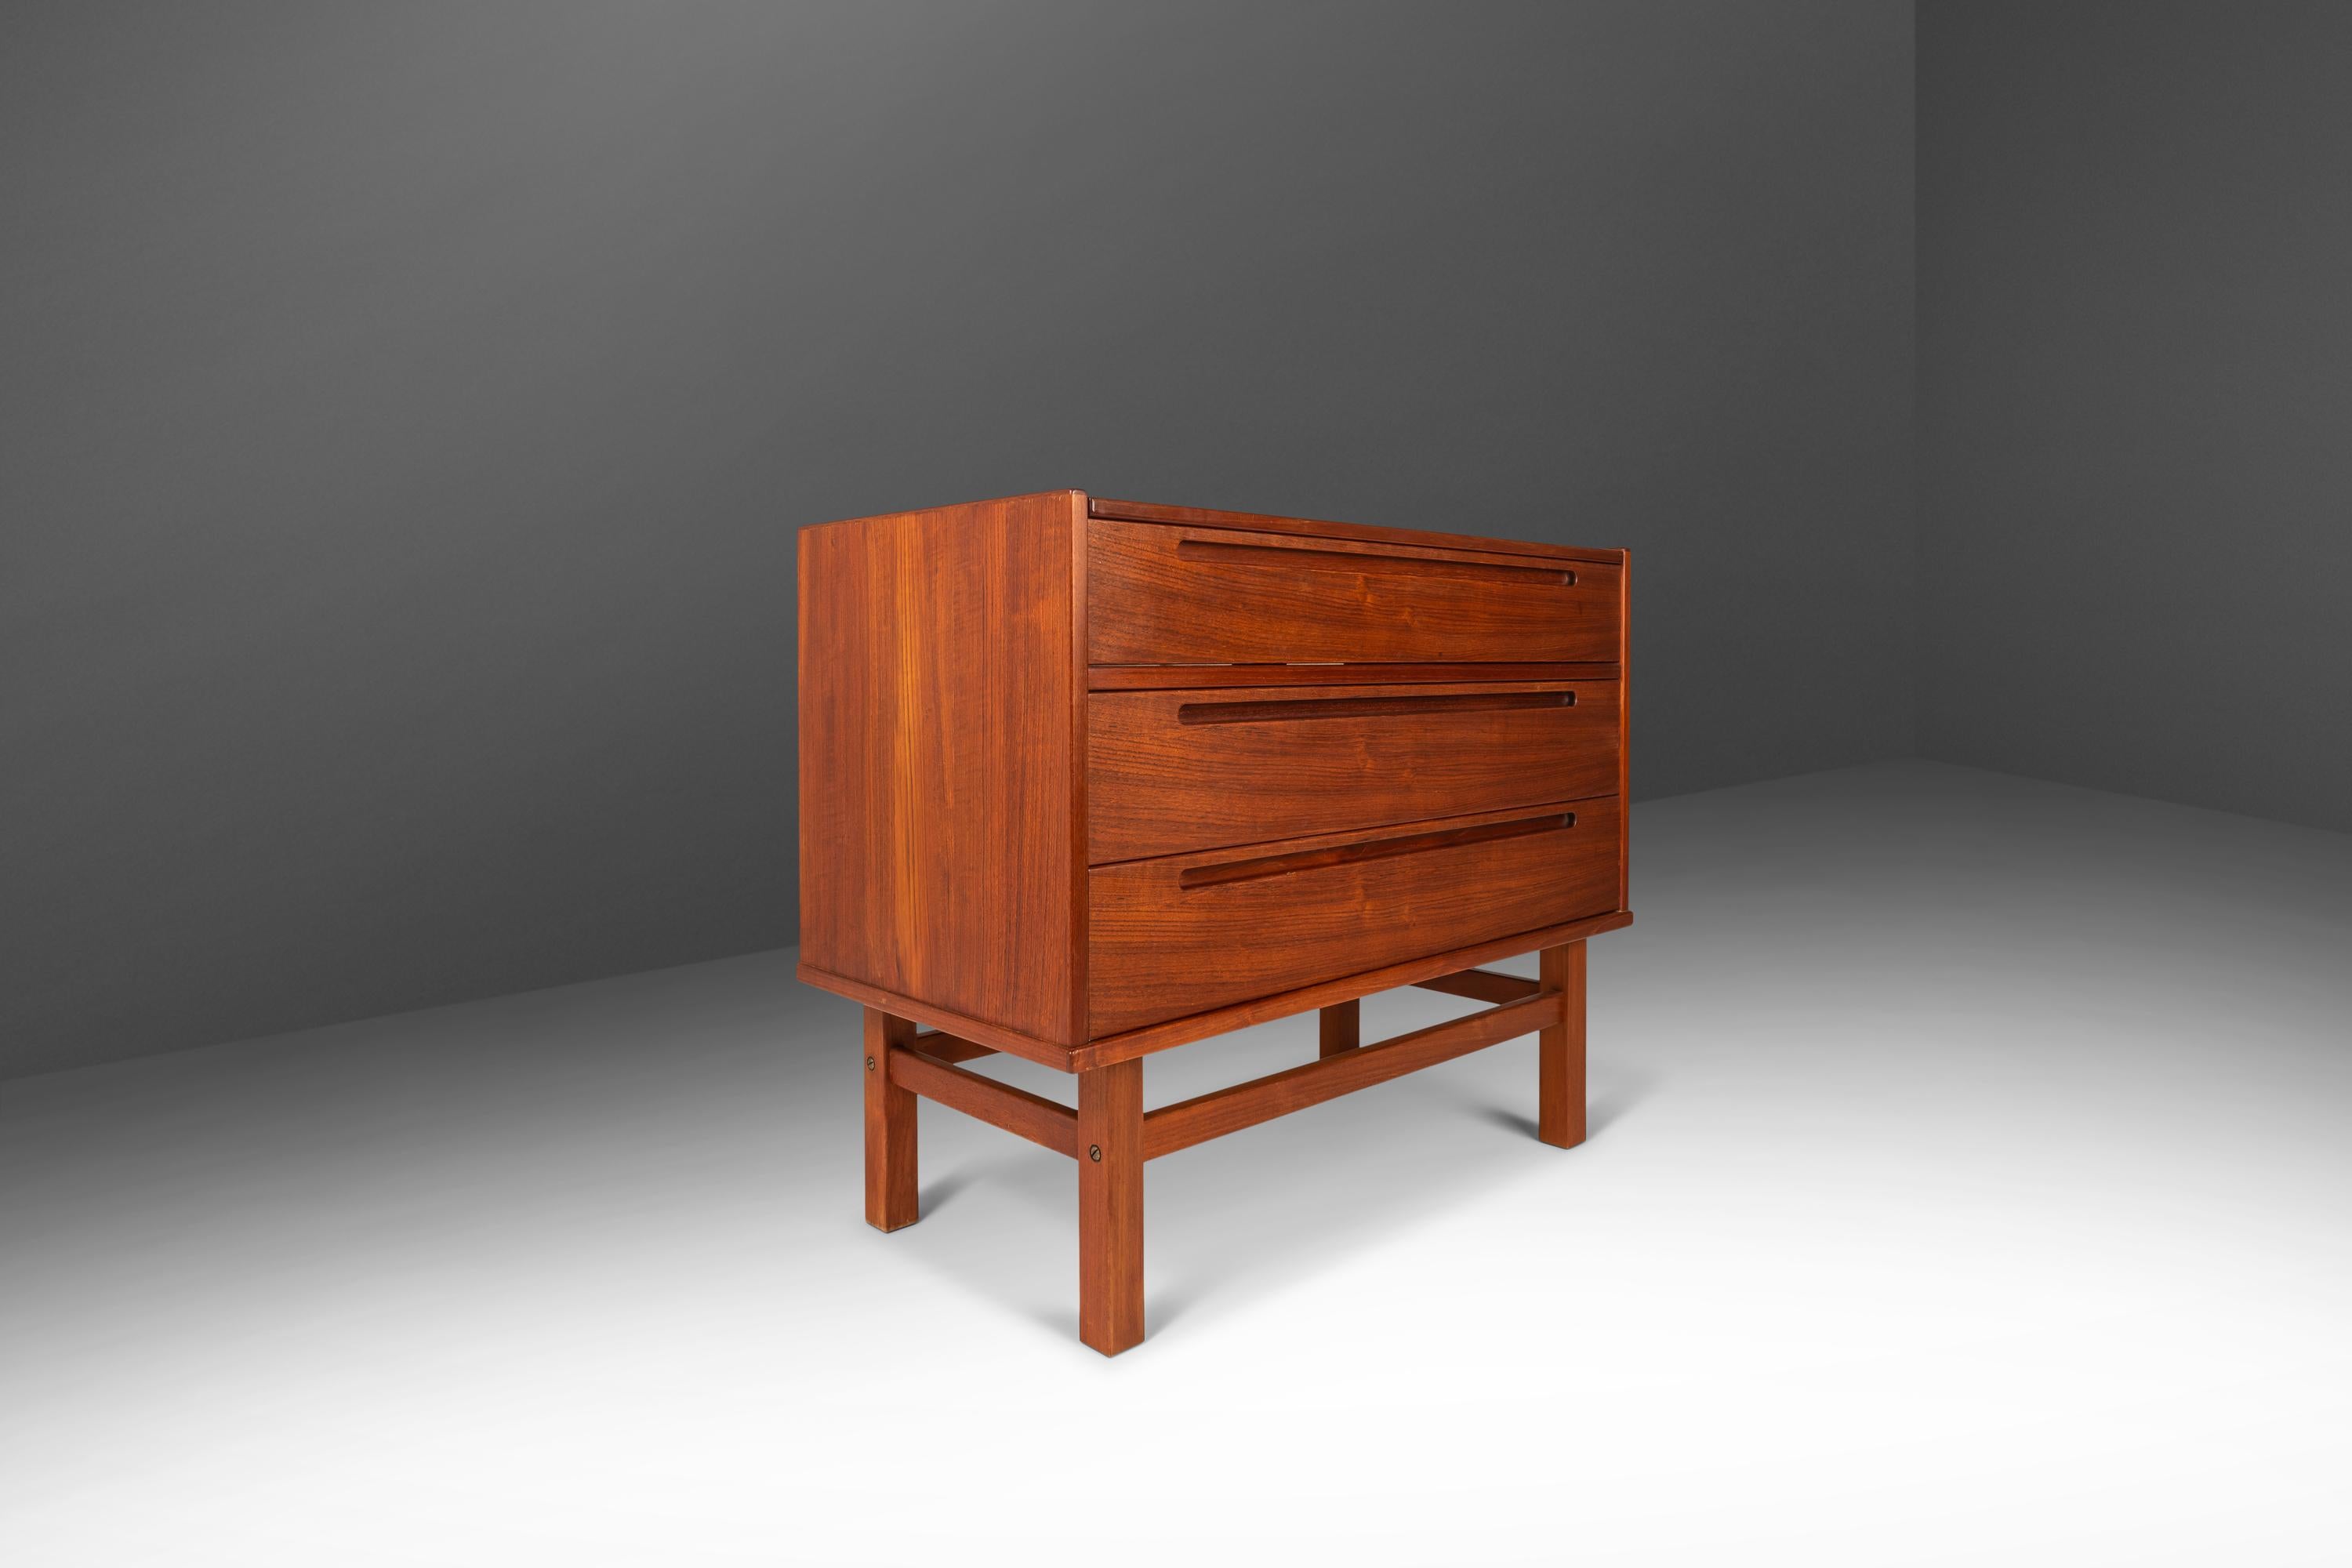 Introducing a true Danish Modern marvel: a rare three-in-one vanity designed by the influential Nils Jonsson for Torring Møbelfabrik. Save for a small veneer repair this exquisite dresser is in original, vintage condition making it the perfect